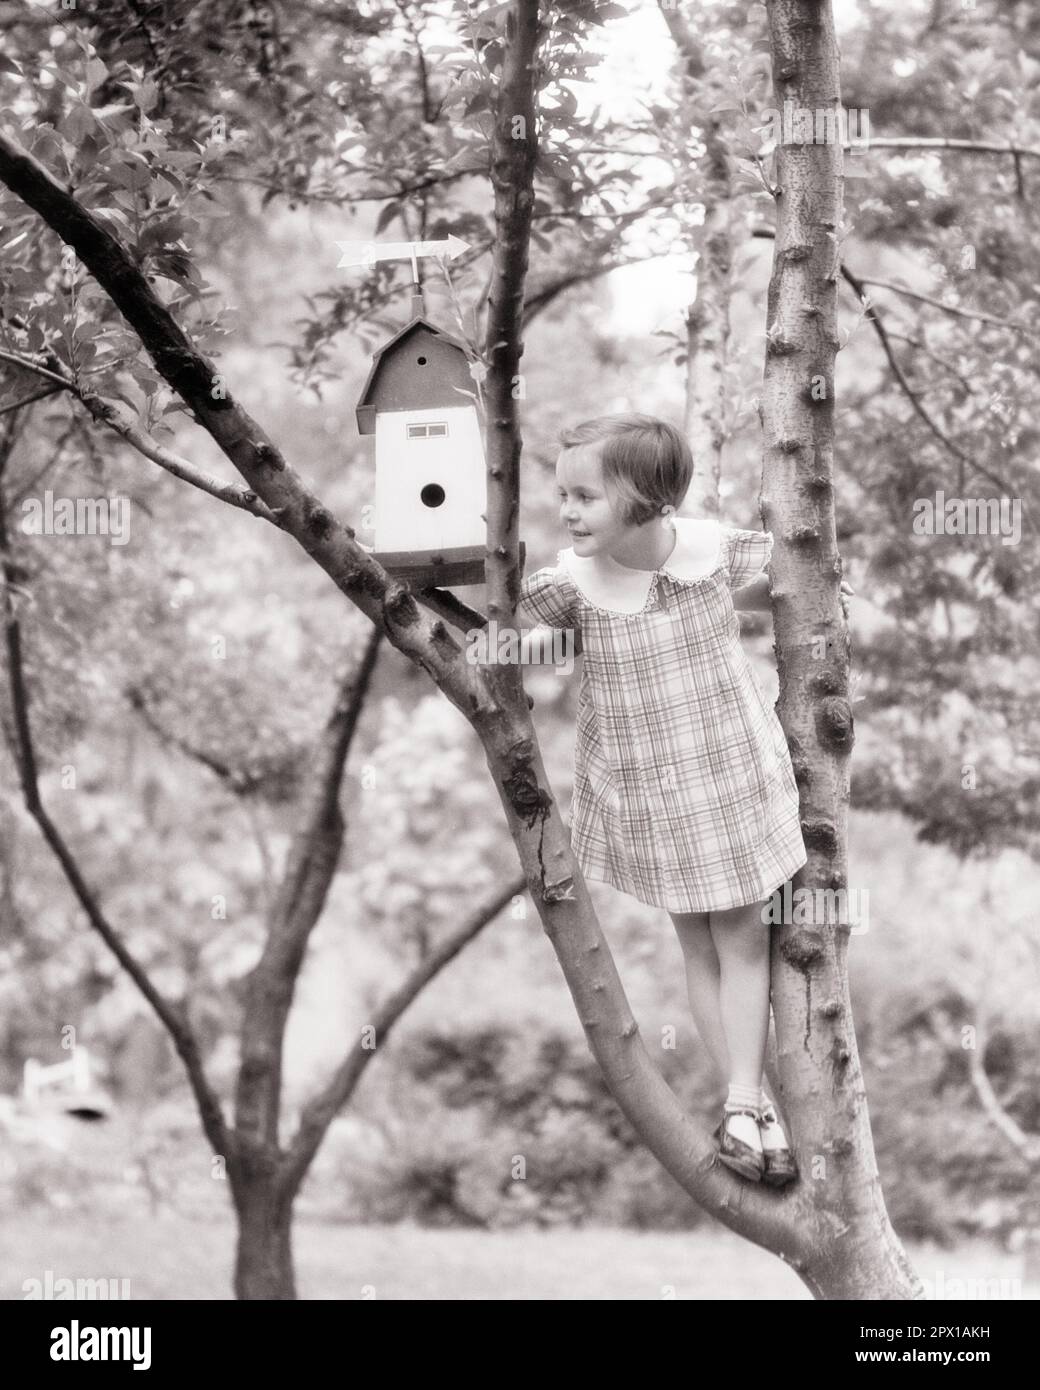 1930s CURIOUS LITTLE GIRL IN DRESS WITH WHITE COLLAR AND MARY JANE SHOES CLIMBING IN TREE TO LOOK INTO A BIRD HOUSE - j6969 HAR001 HARS FULL-LENGTH SCENIC CARING RISK CONFIDENCE B&W GOALS TEMPTATION HAPPINESS WELLNESS HIGH ANGLE ADVENTURE COURAGE AND EXCITEMENT KNOWLEDGE RECREATION MARY JANE PRIDE A IN INTO OPPORTUNITY TO CONNECTION CONCEPTUAL CURIOUS STYLISH BIRD HOUSE GROWTH JUVENILES WILDLIFE BLACK AND WHITE CAUCASIAN ETHNICITY HAR001 OLD FASHIONED Stock Photo